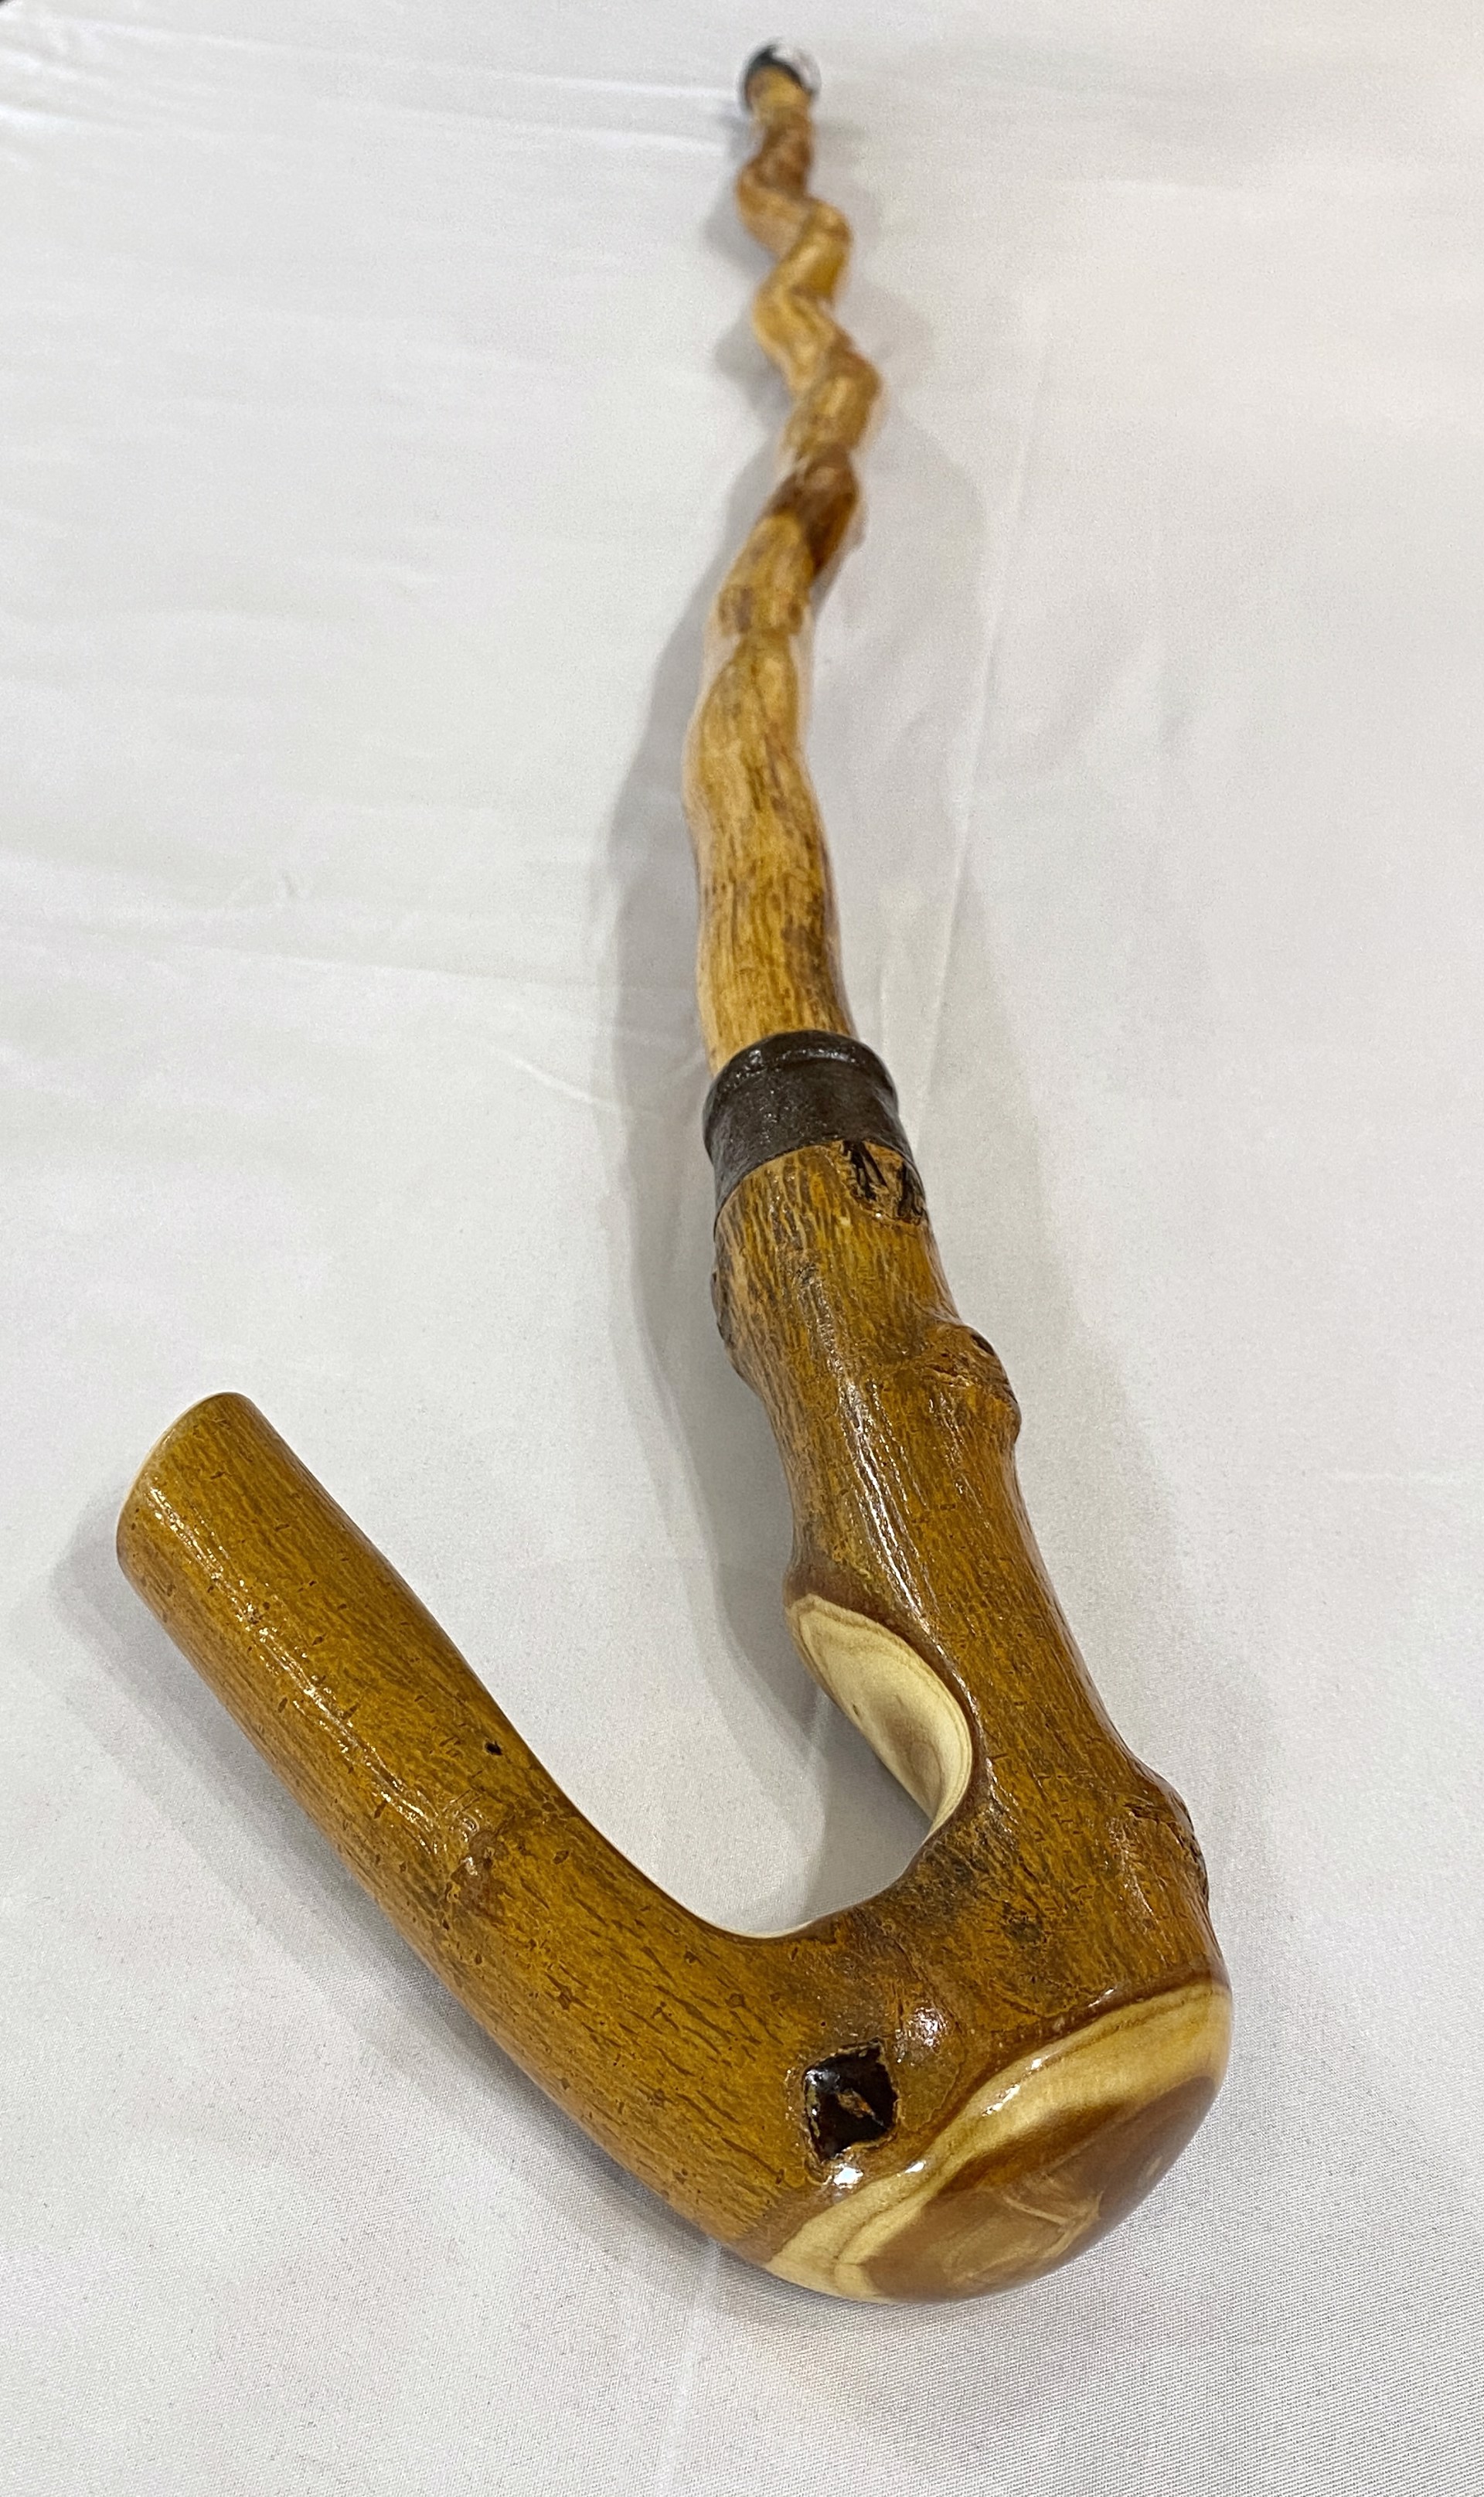 Wooden Walking Stick #5 by Kevin Foote